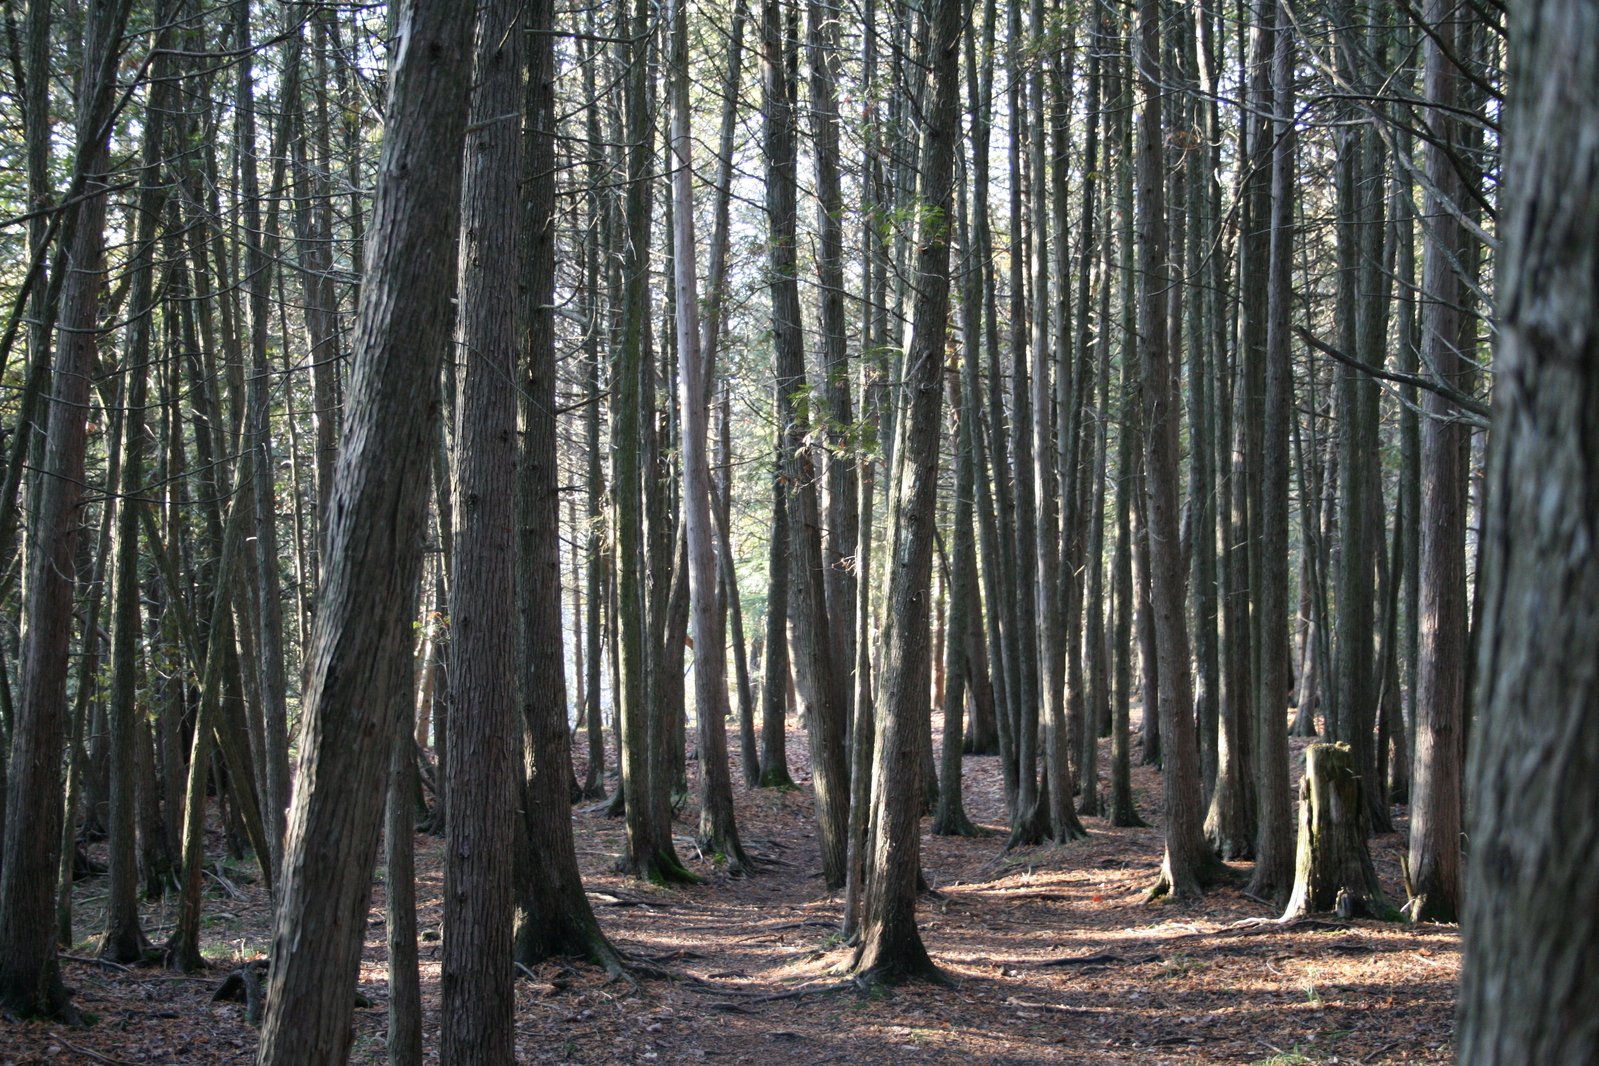 an area of tall, thin trees that has been shaded by sunlight